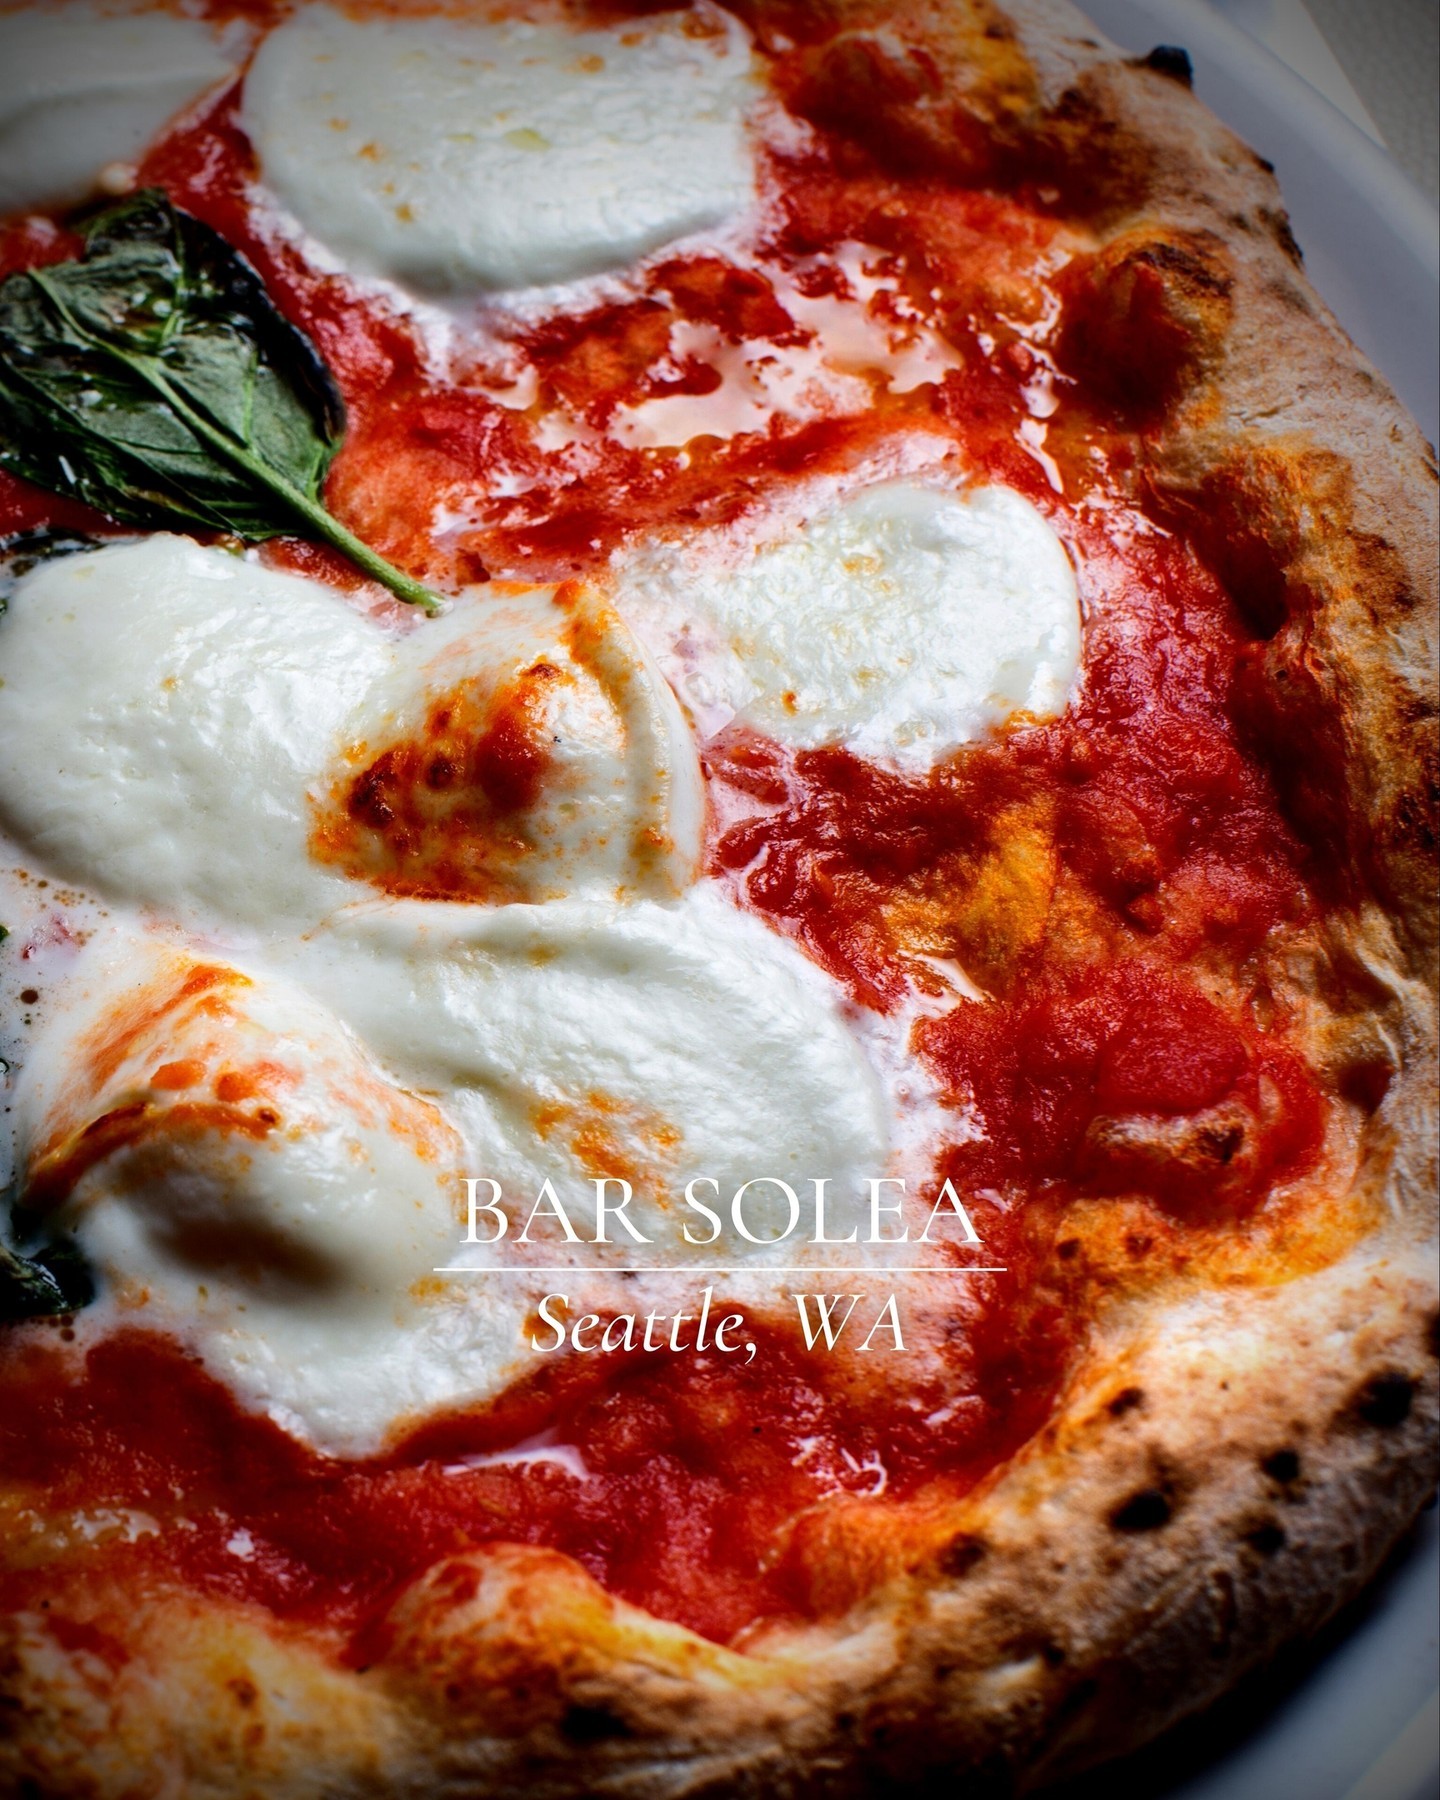 NOW OPEN IN SEATTLE: @bar.solea 🍕 Another staple by Hitchcock Restaurant Group. Owner Brendan McGill is taking the reins as chef and offering authentic Italian dishes and an extensive wine program. Fun fact - Solea, means ‘base’ in Latin, and refers to the prized Solea tomatoes used in the finest pizzerias in Naples. Read more about @bar.solea 's beautiful Italian cuisine using the link in our bio!